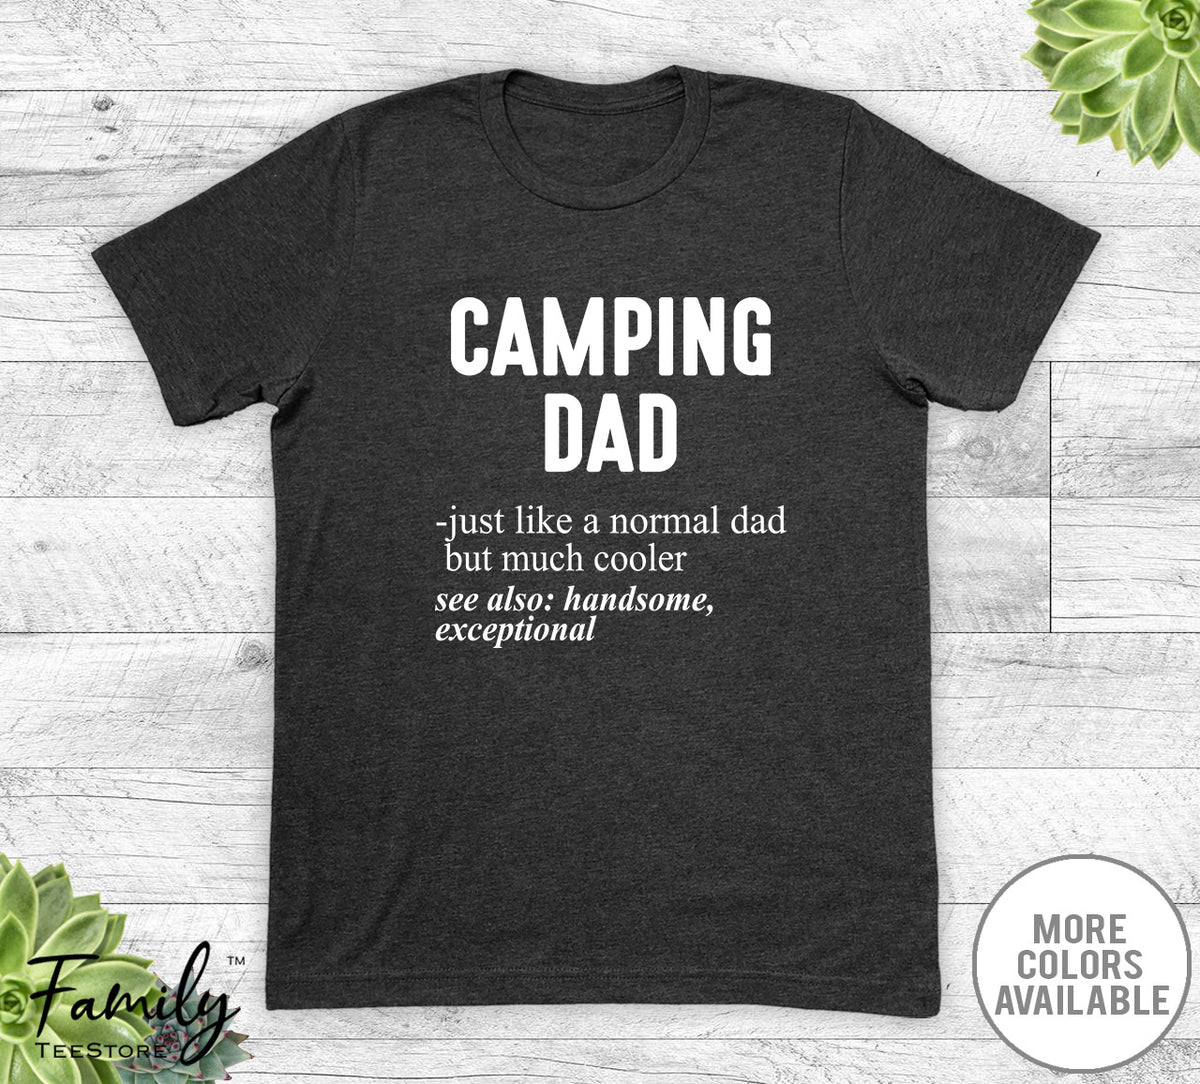 Camping Dad Just Like A Normal Dad - Unisex T-shirt - Camping Shirt - Camping Dad Gift